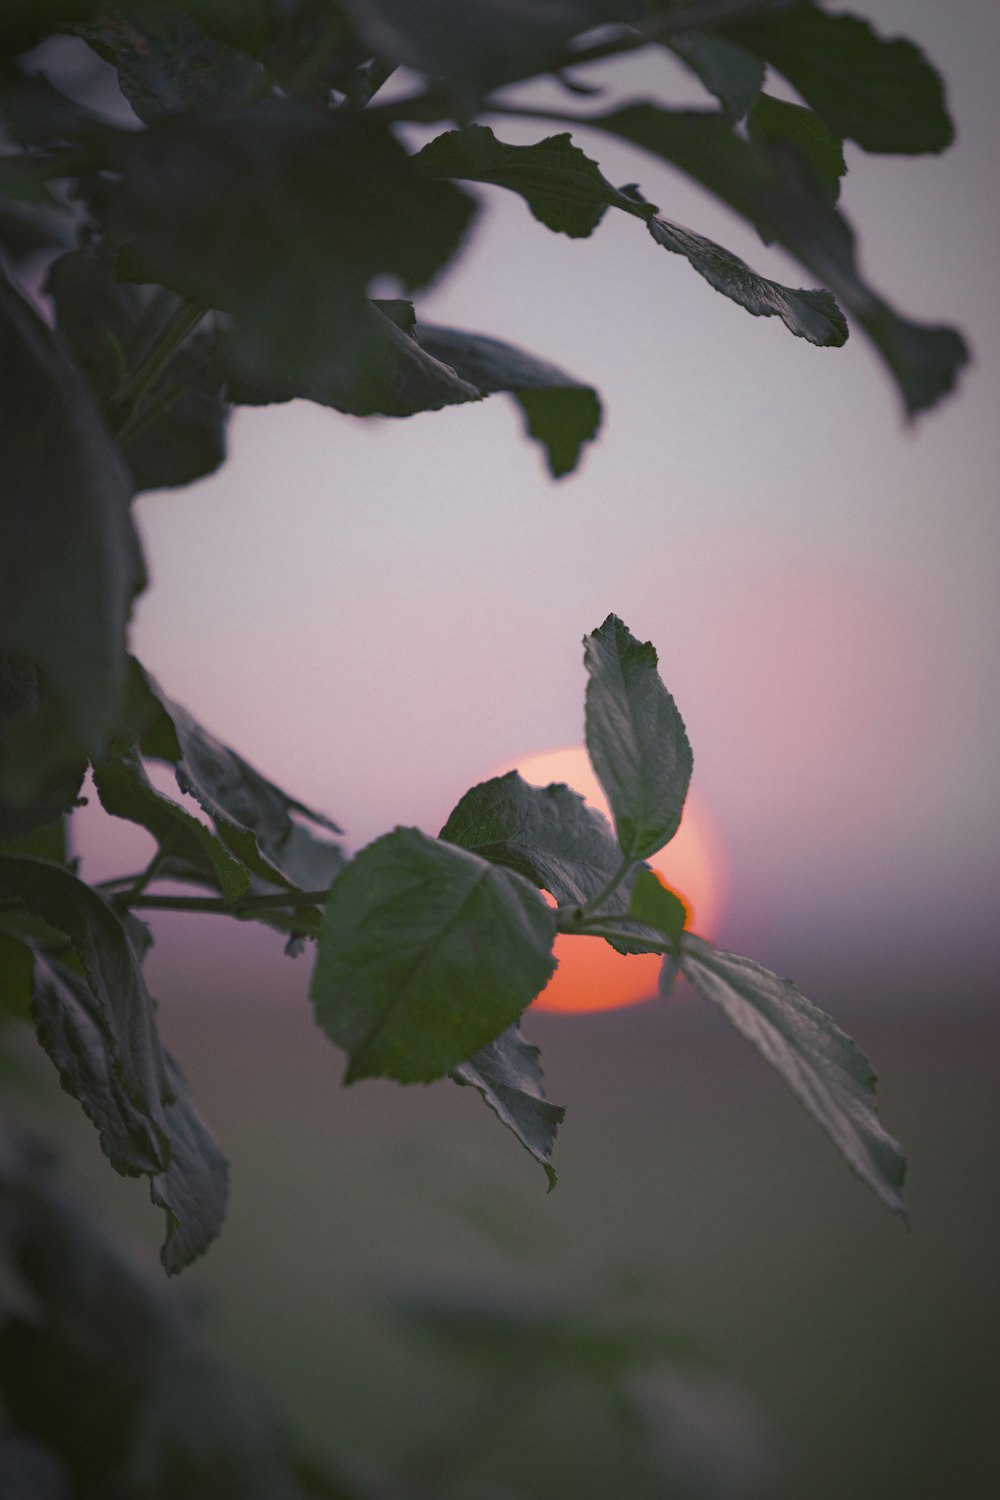 the sun is setting behind the leaves of a tree